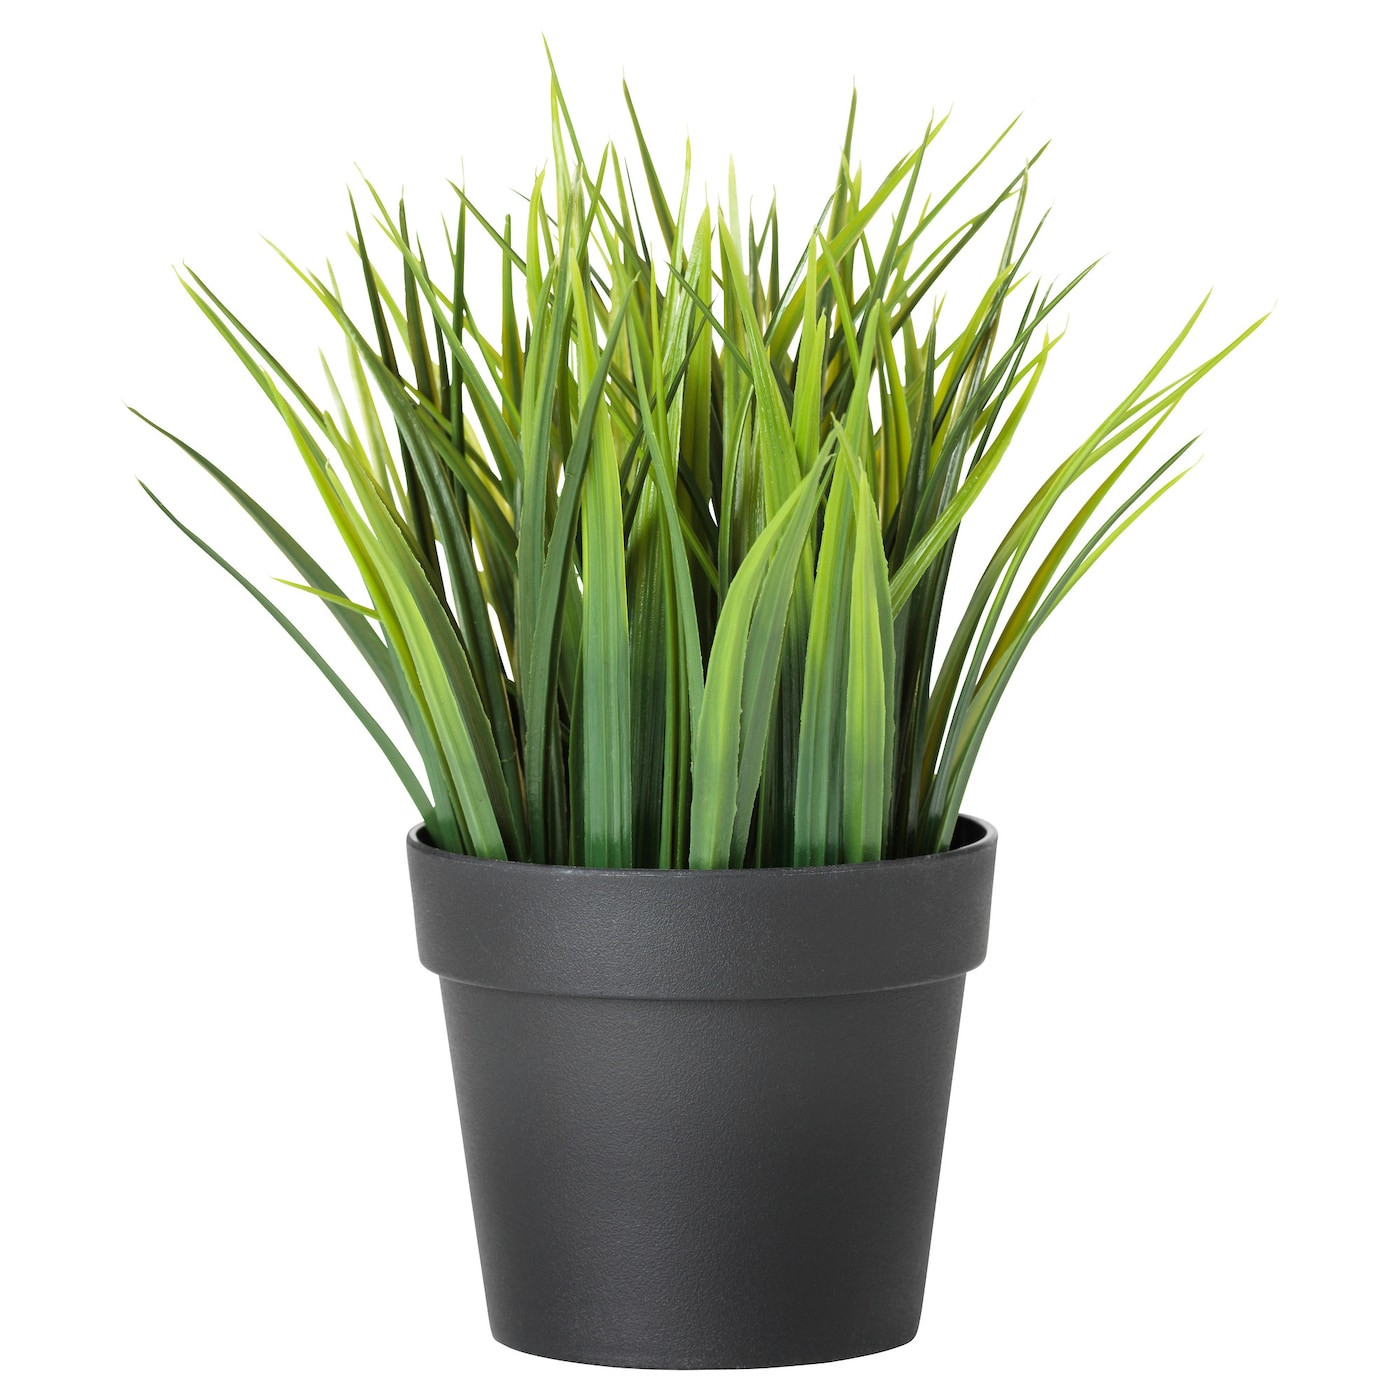 Fejka Artificial Potted Plant - In/Outdoor Grass 9 Cm